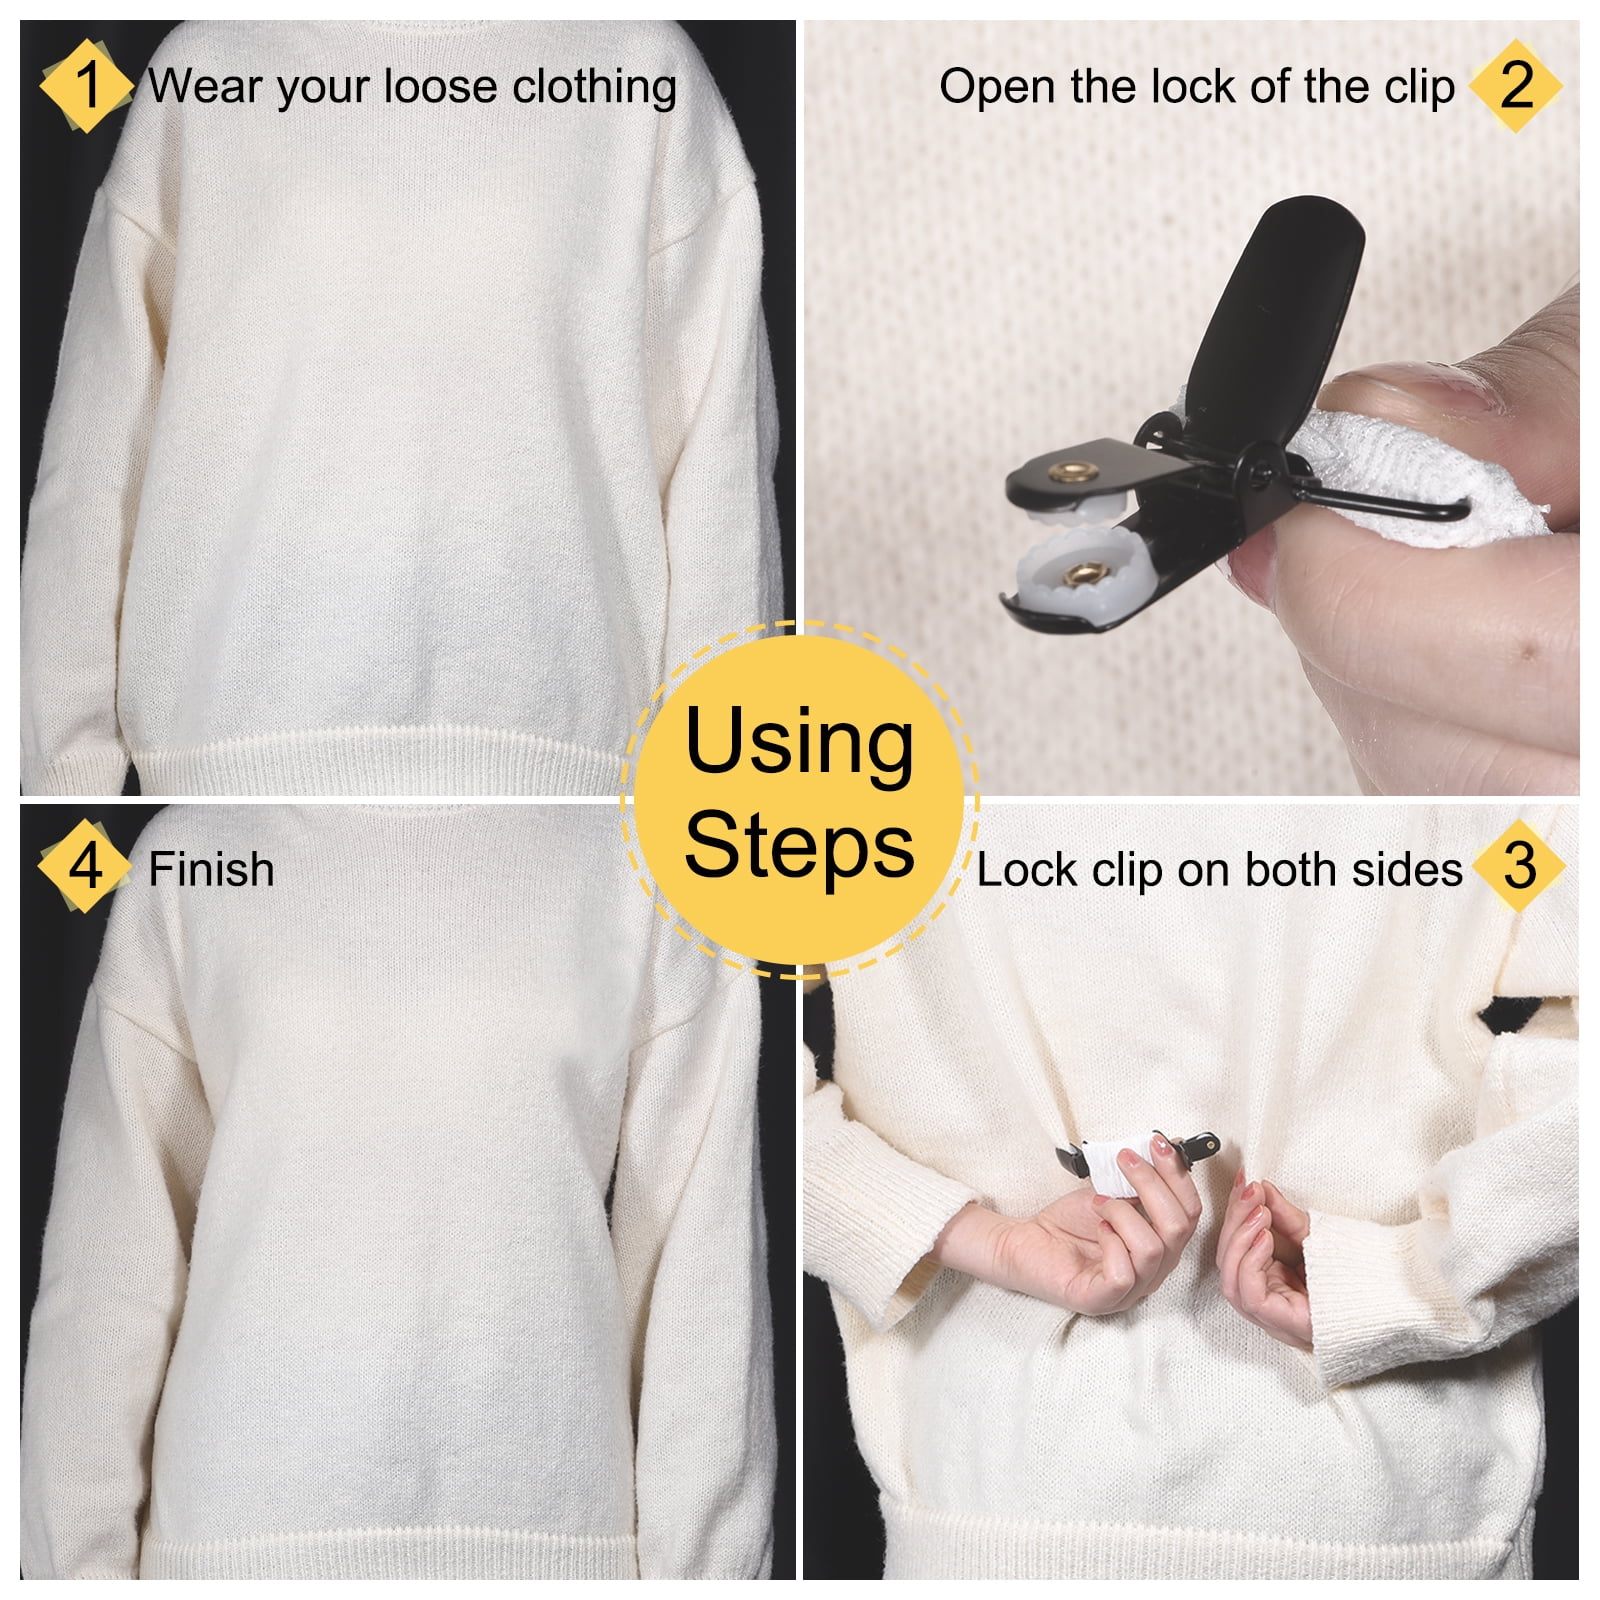 Waist cinch clips 🤯 how to tighten your dress! #fashiontips #styletip